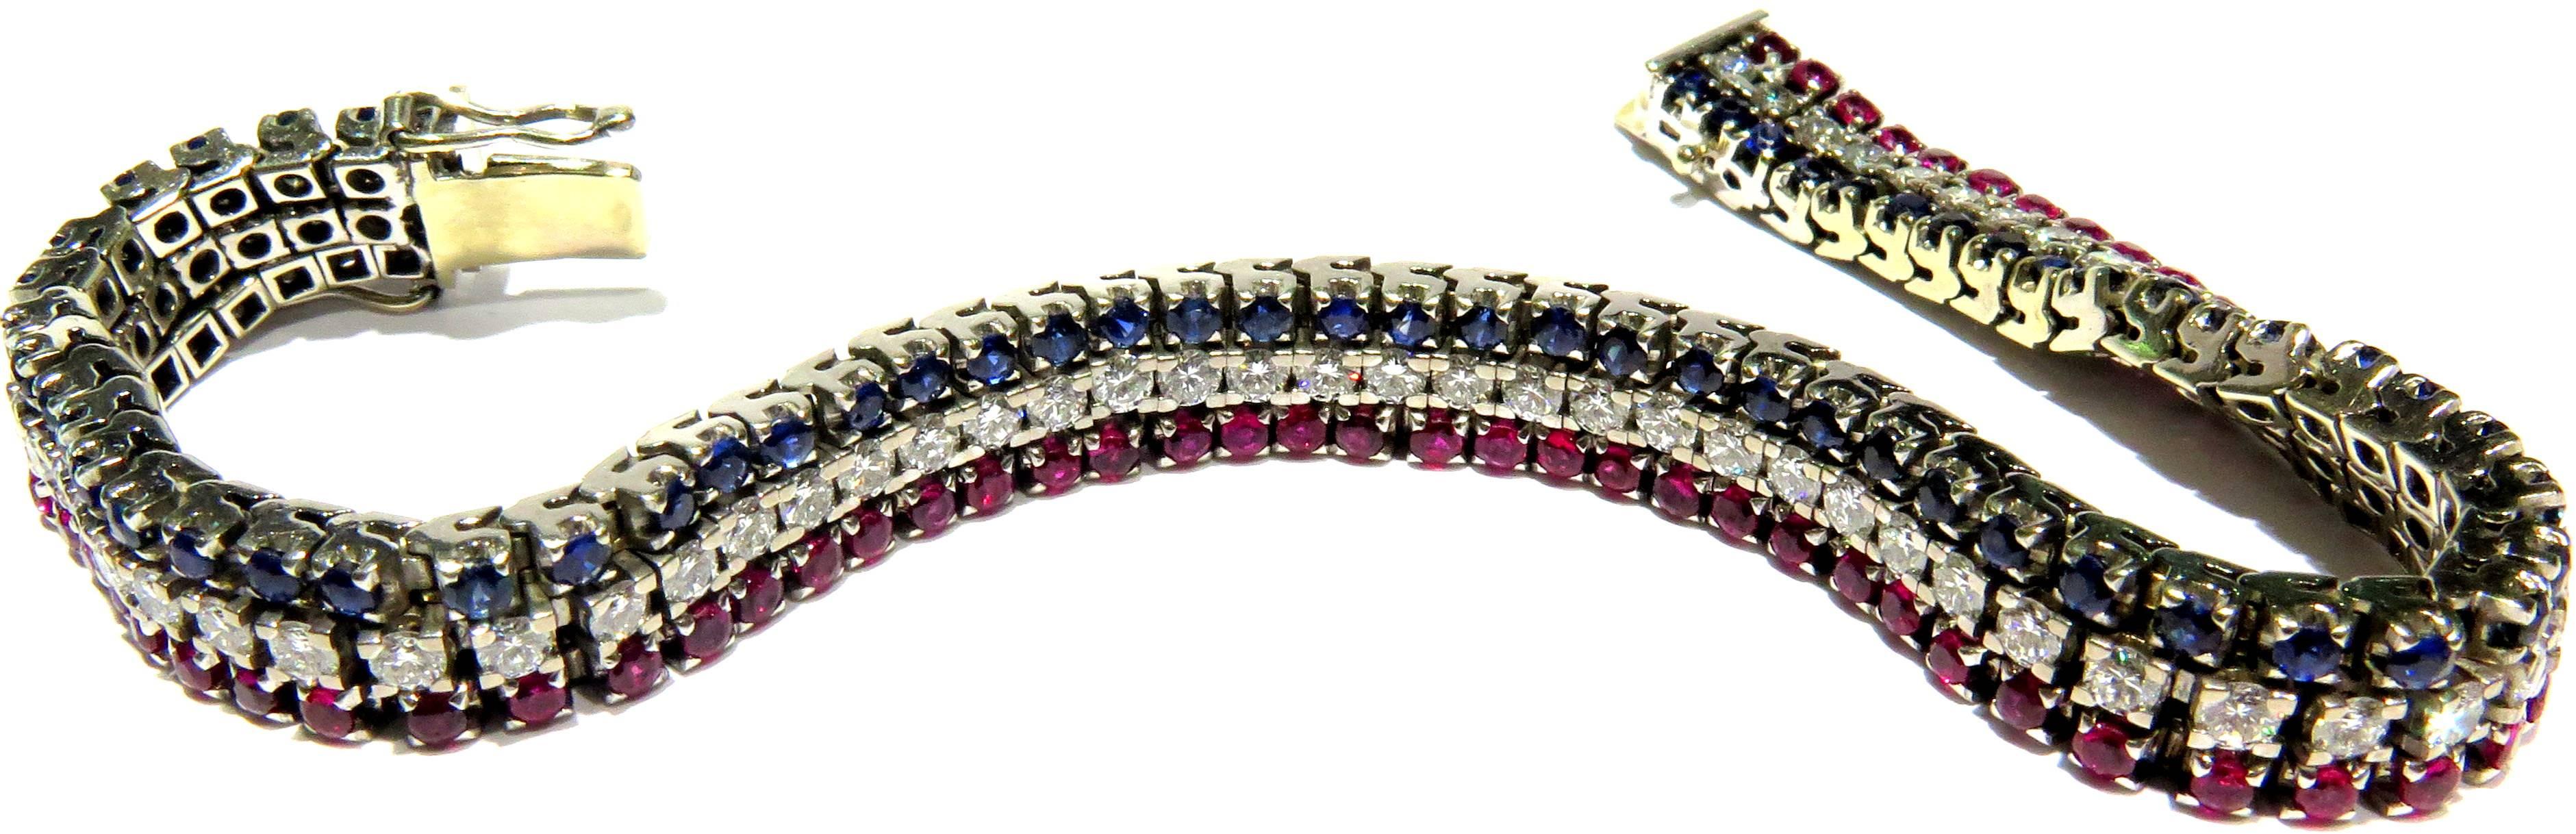 This elegant bracelet drapes around the wrist like silk. It is extrememly comfortable to wear and goes with almost anything. There are approximately 5 carats of diamonds and approximately 9.60 carats of rubies and sapphires.
This bracelet measures